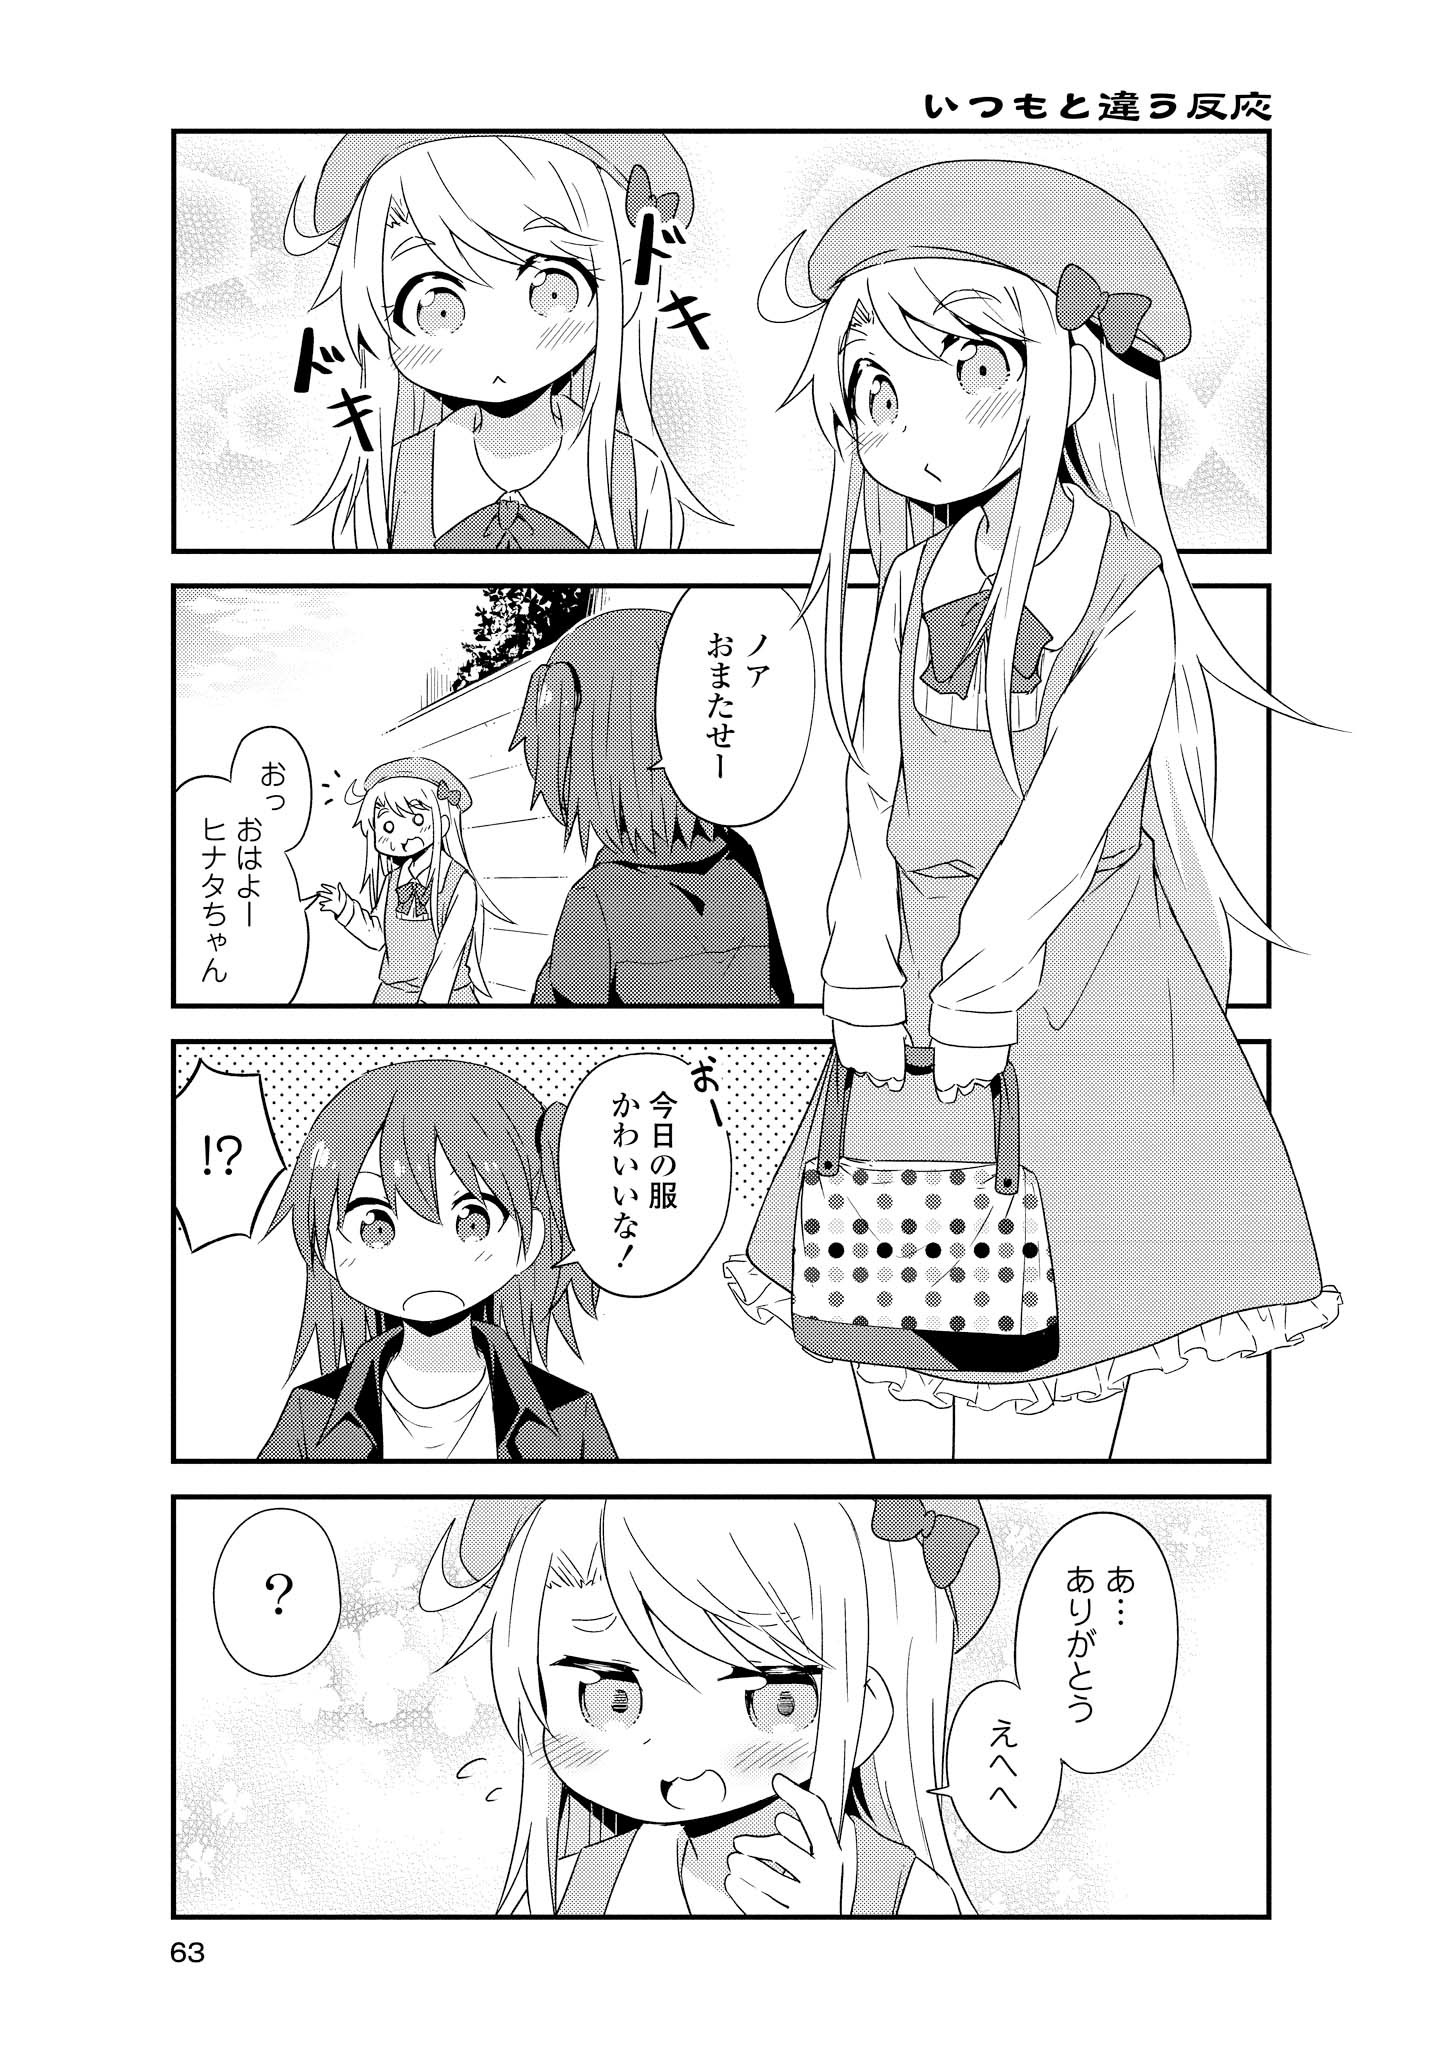 Wataten! An Angel Flew Down to Me 私に天使が舞い降りた！ 第33話 - Page 3